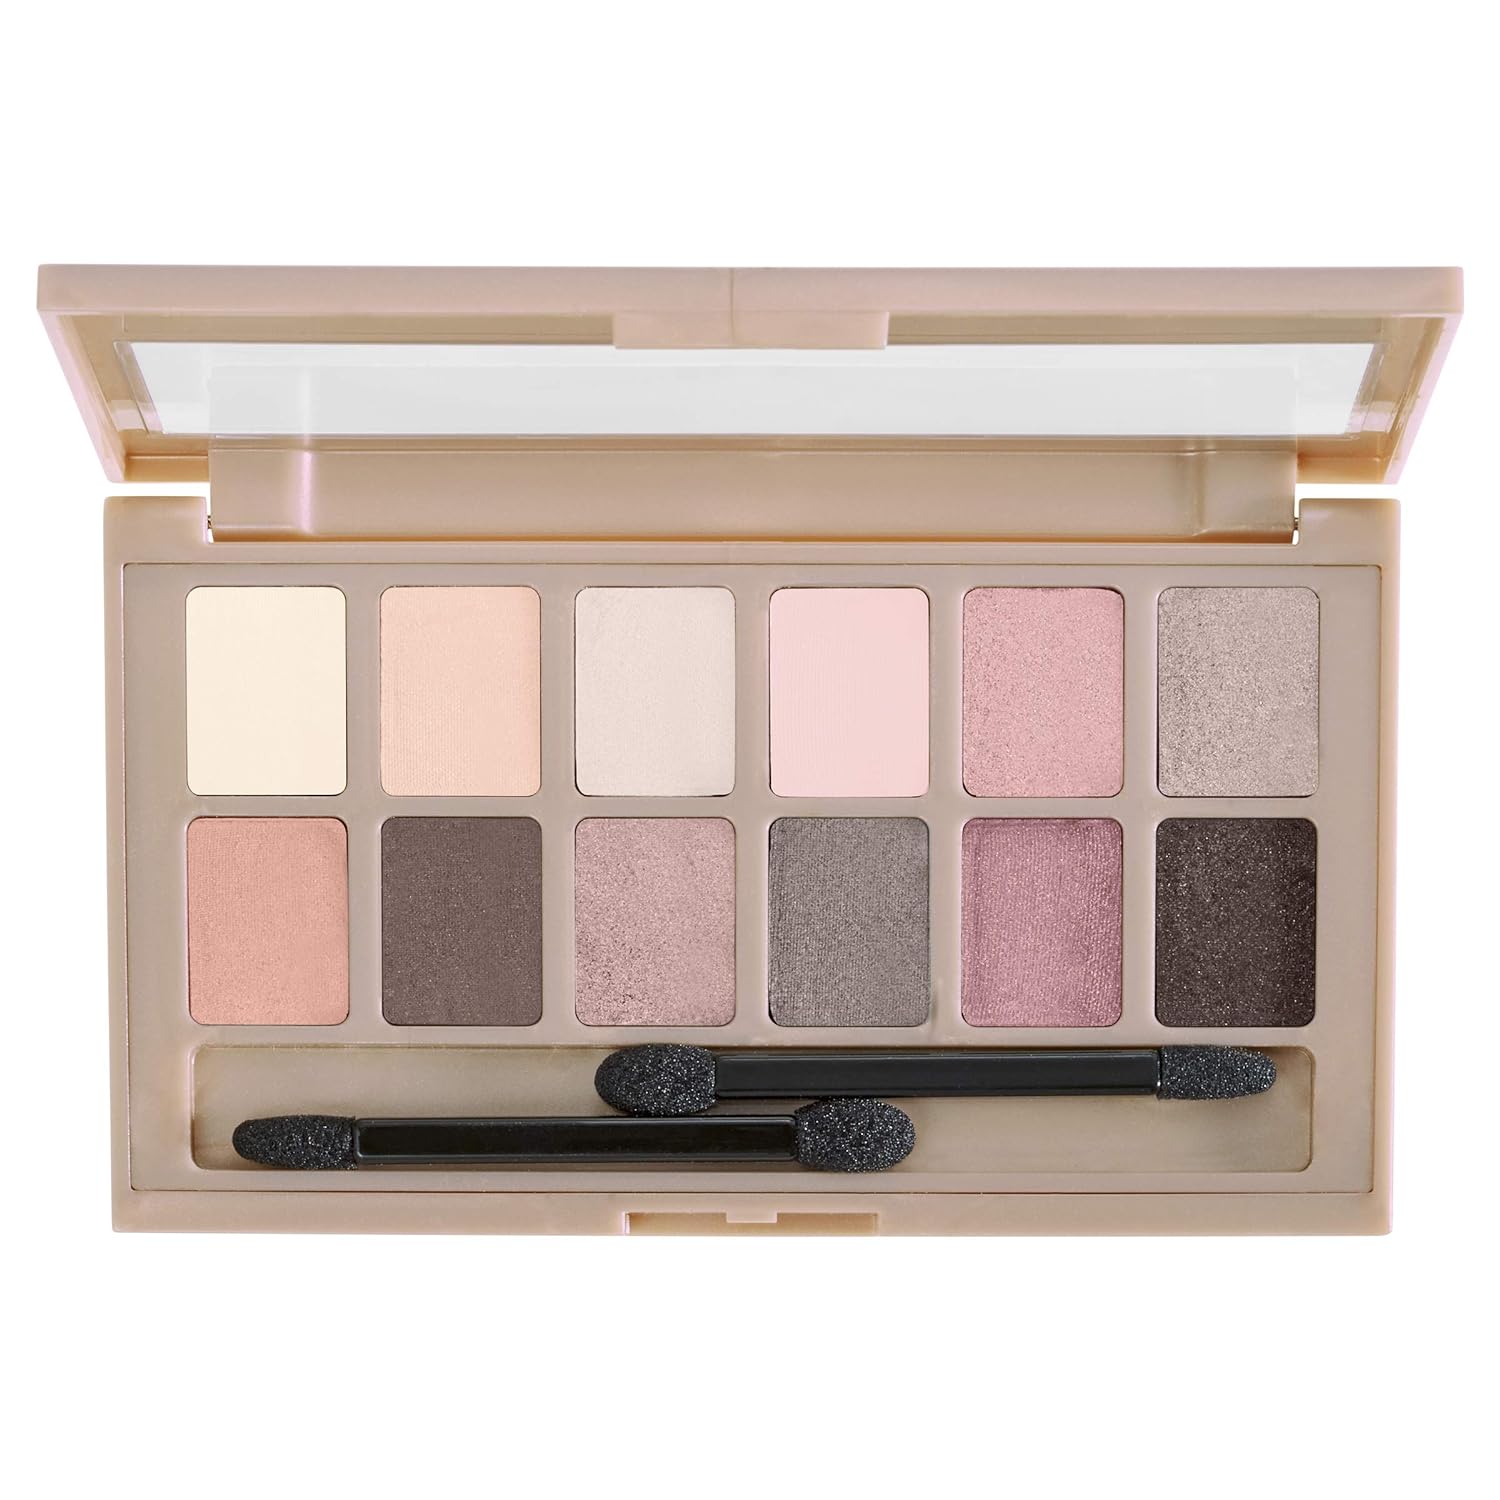  Maybelline New York Maybelline The Blushed Nudes Eyeshadow Makeup Palette